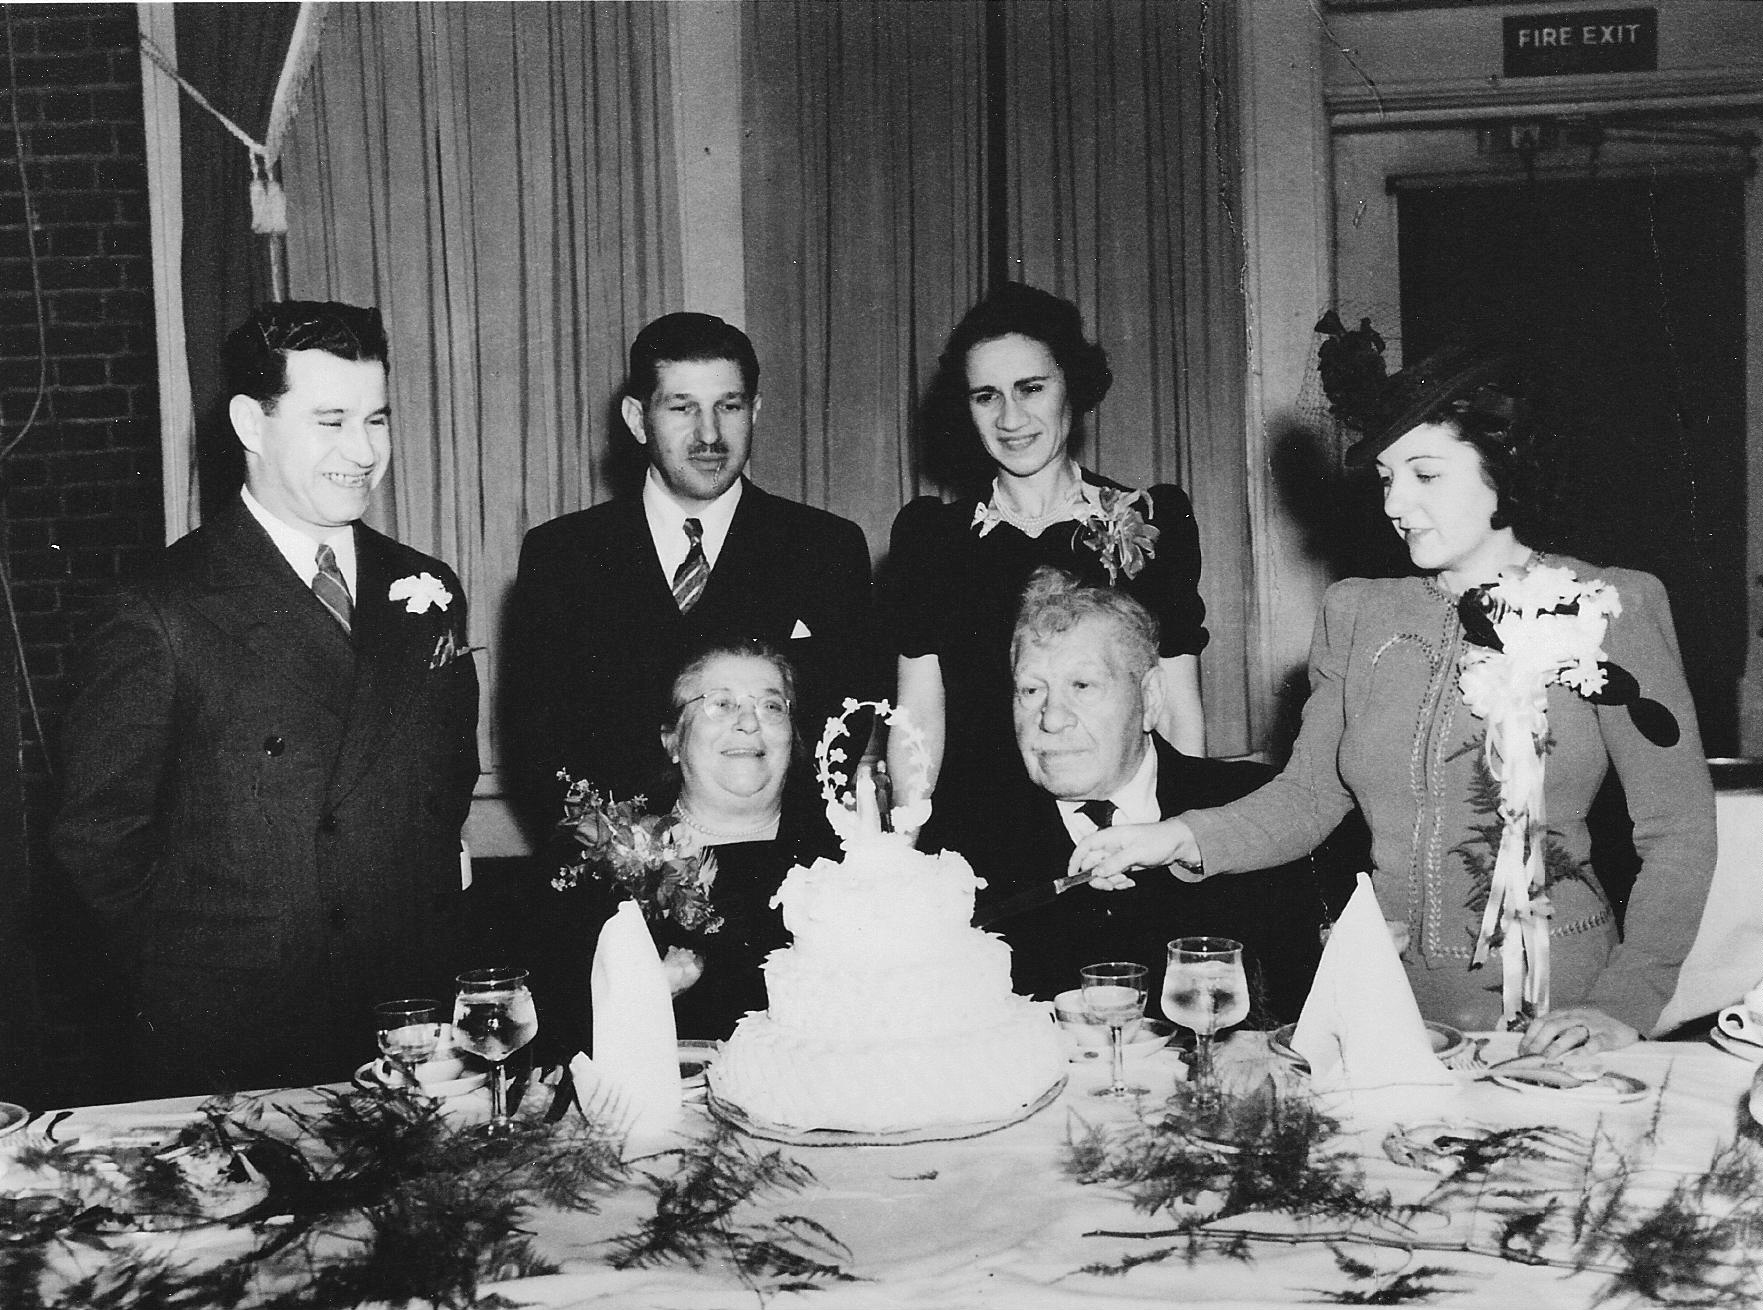 Abraham and Geraldine Serby, Louis and Ida Serby, at the wedding of Robert Levee and Matilda Sobey, about December 1940